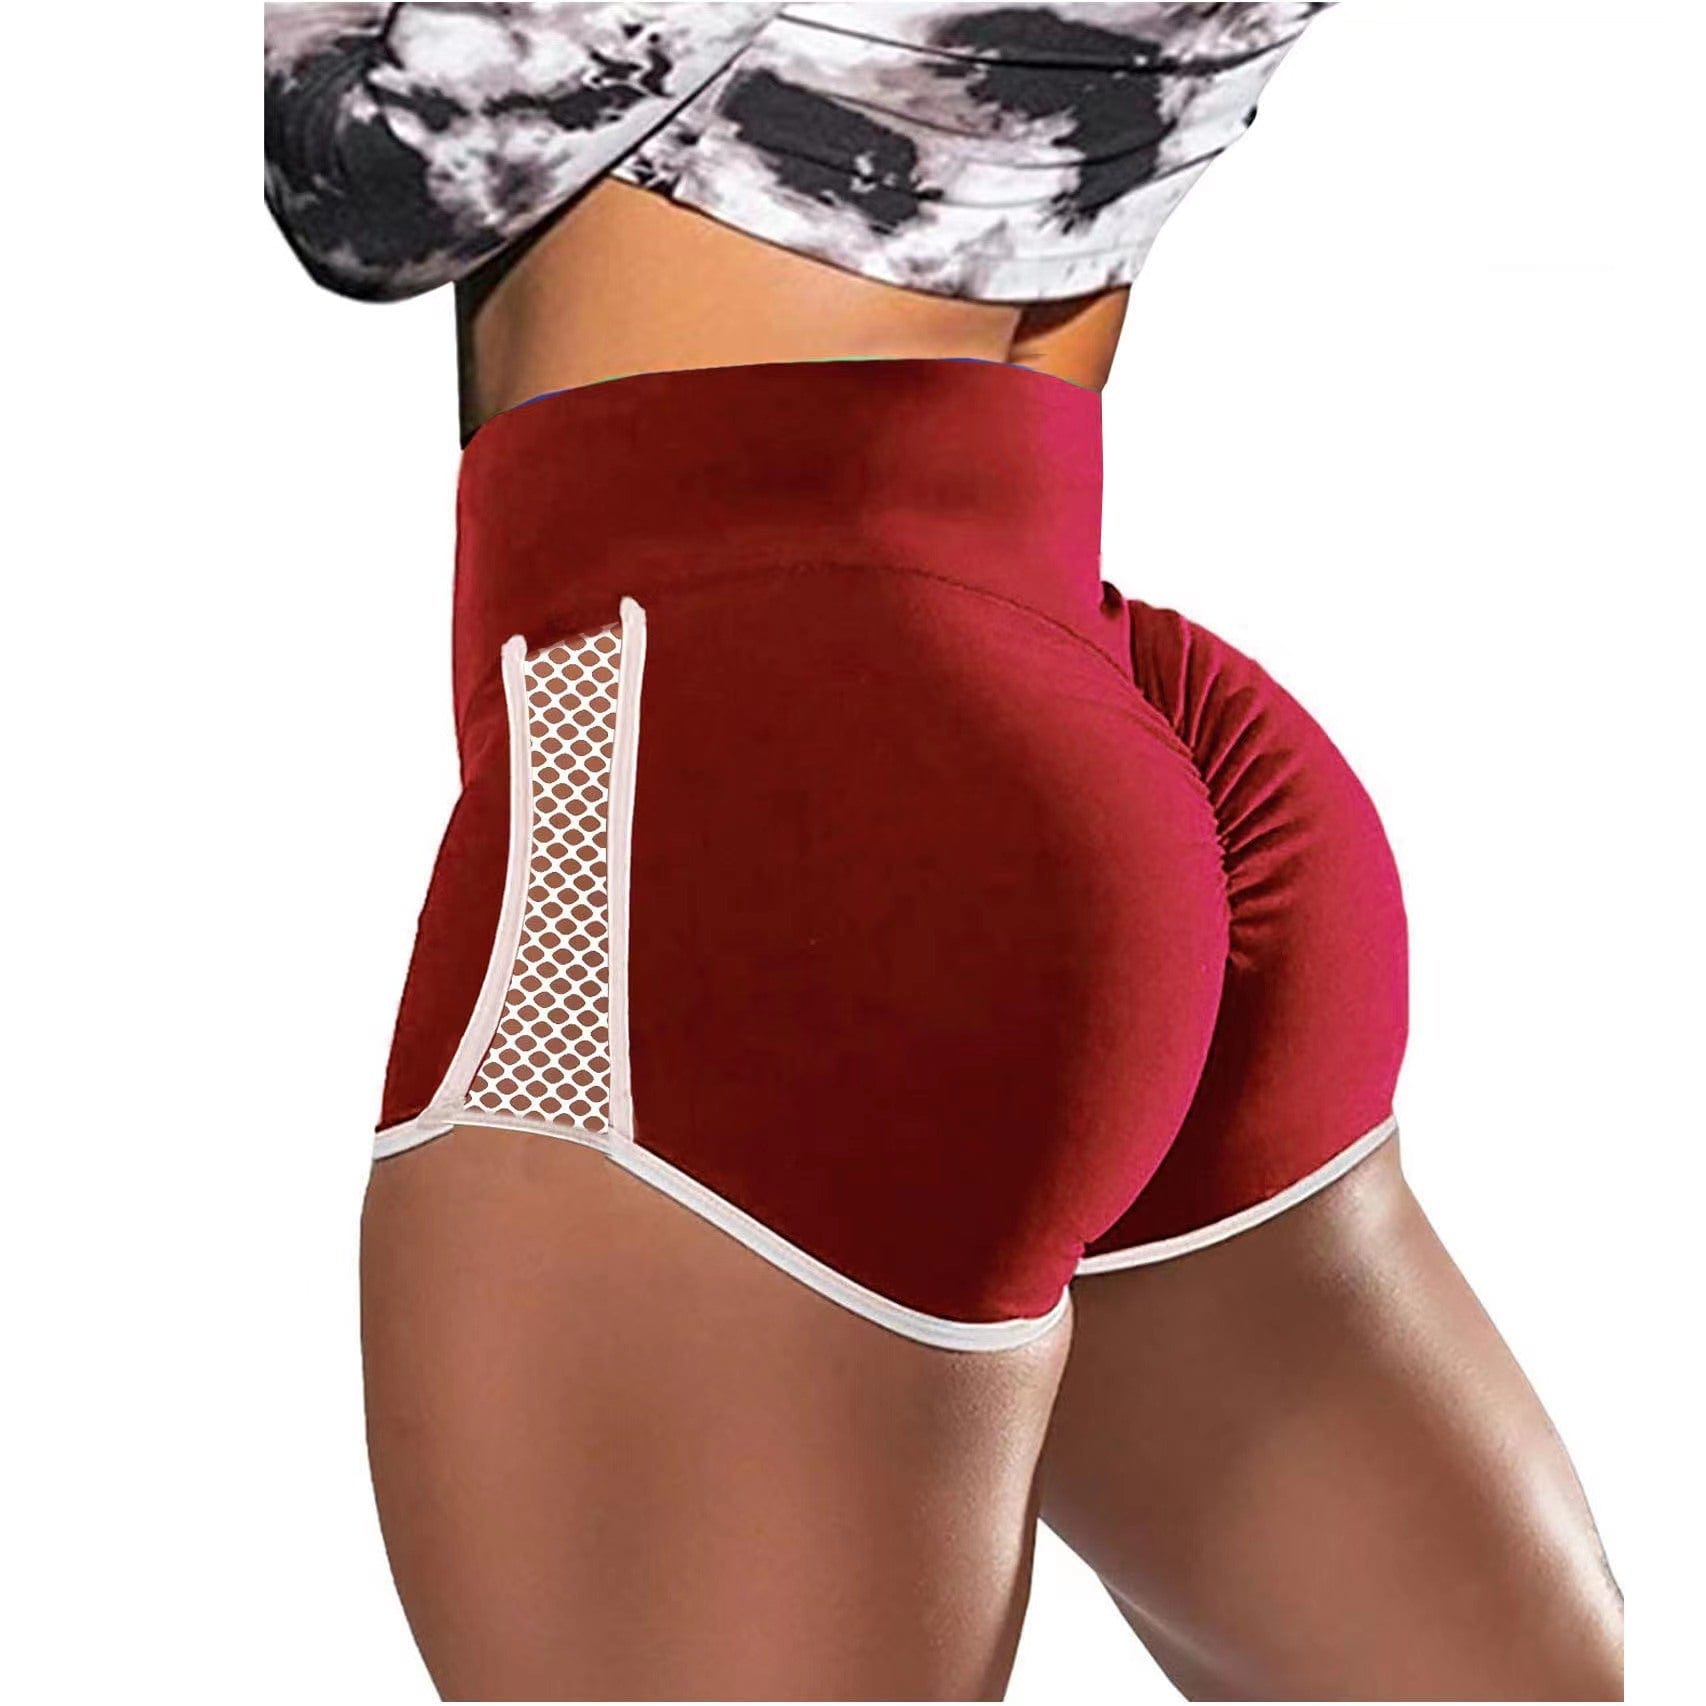 ALLRJ Cross-border European And American Foreign Trade Shorts High Waist Shaping Shorts Fitness Sports Pants Hollow Out Stitching Shorts